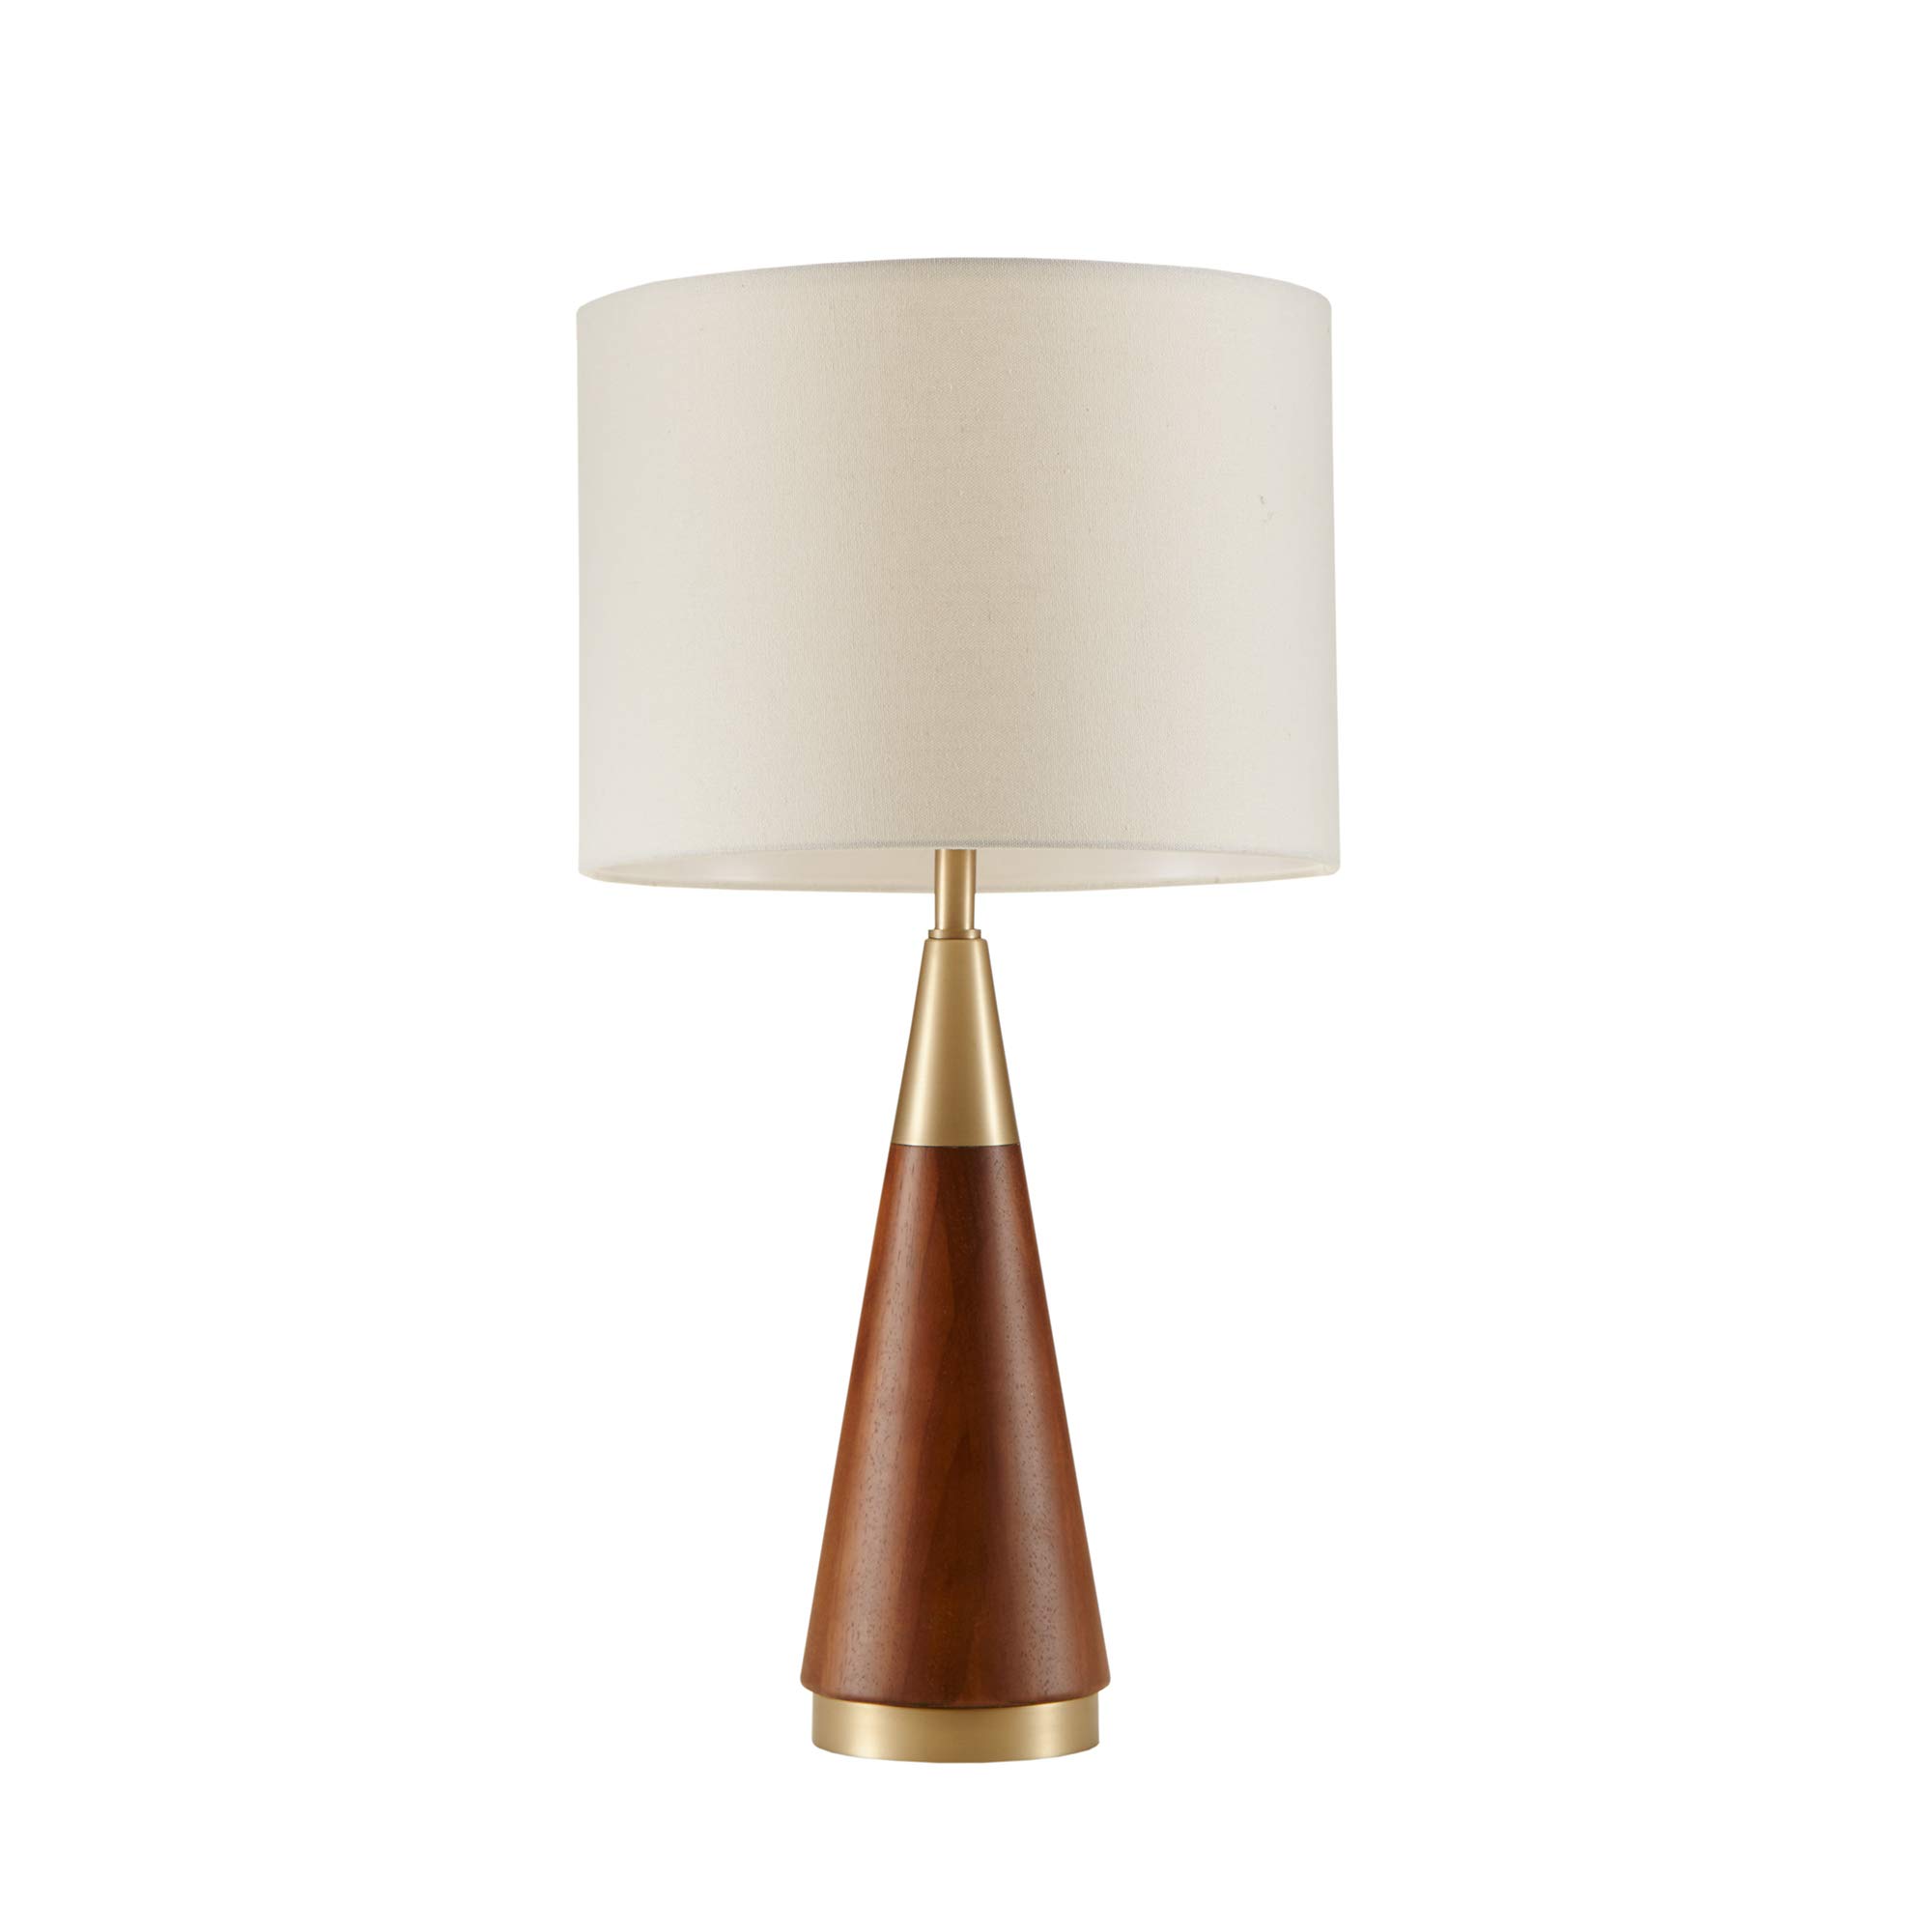 INK+IVY Chrislie Gold White Mid Century Modern Table Lamp , Contemporary Metal Wood Table Lamps for Bedrooms , 13.5